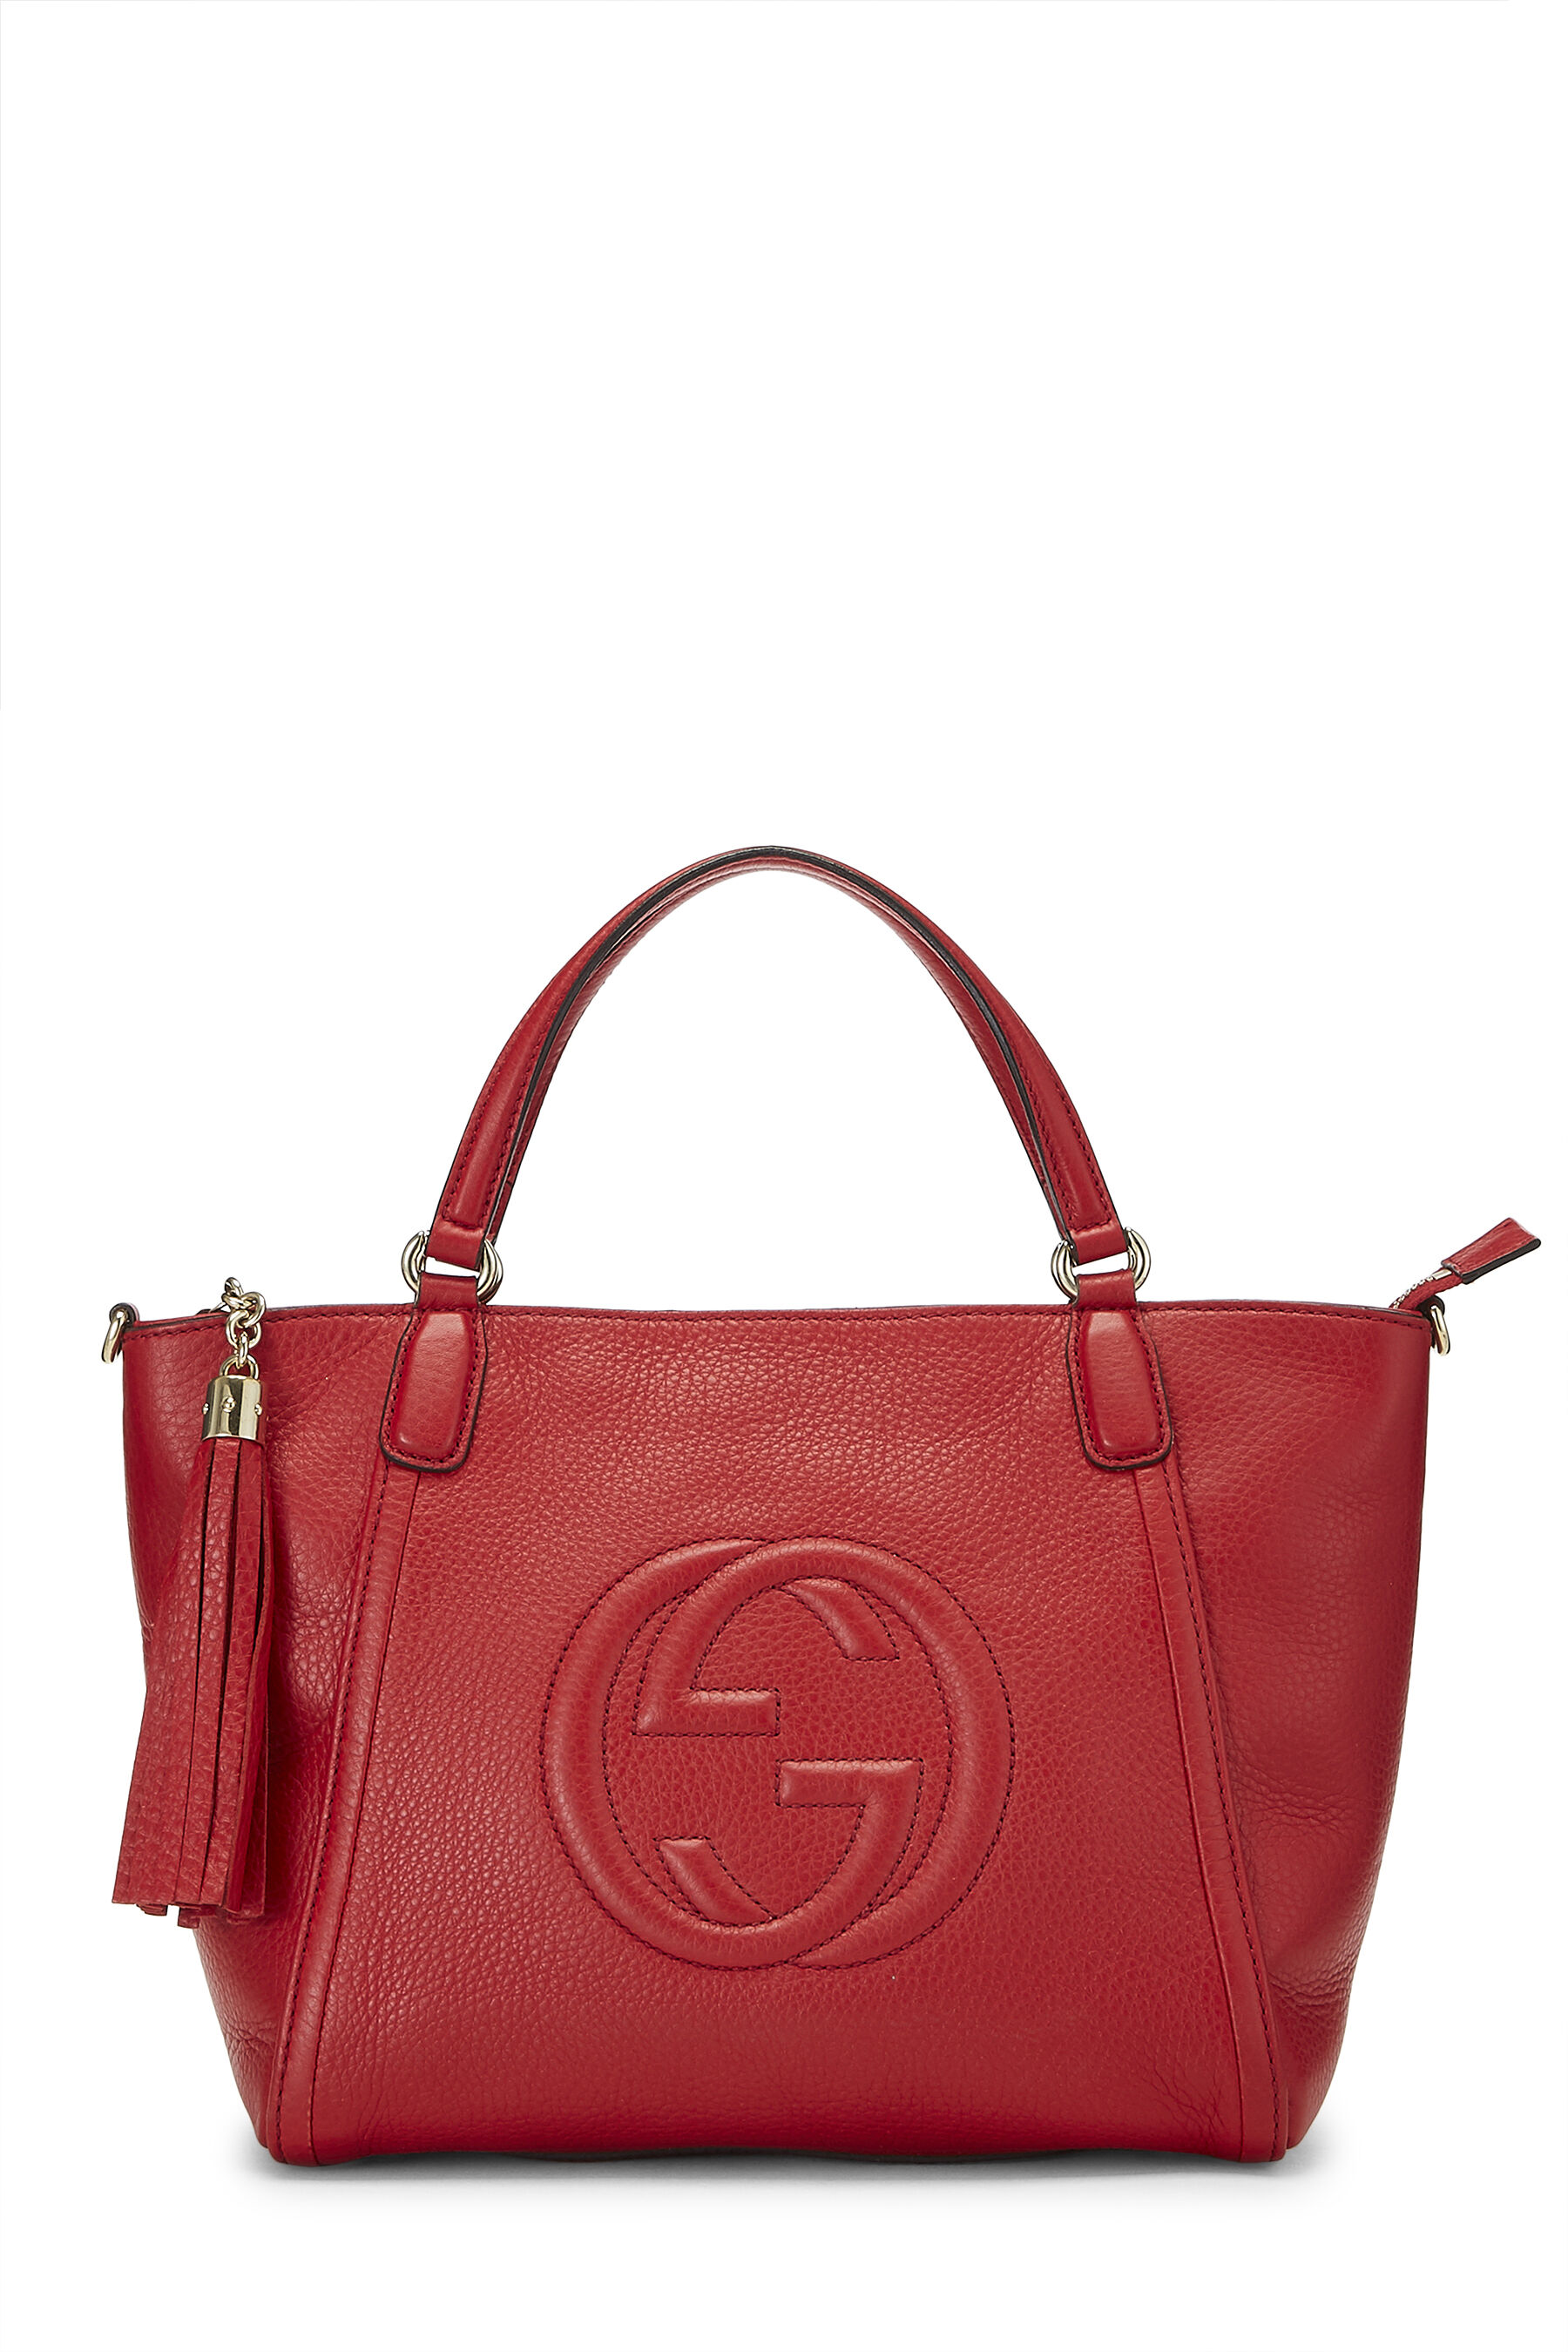 Gucci Red Leather Soho Top Handle Bag - RvceShops